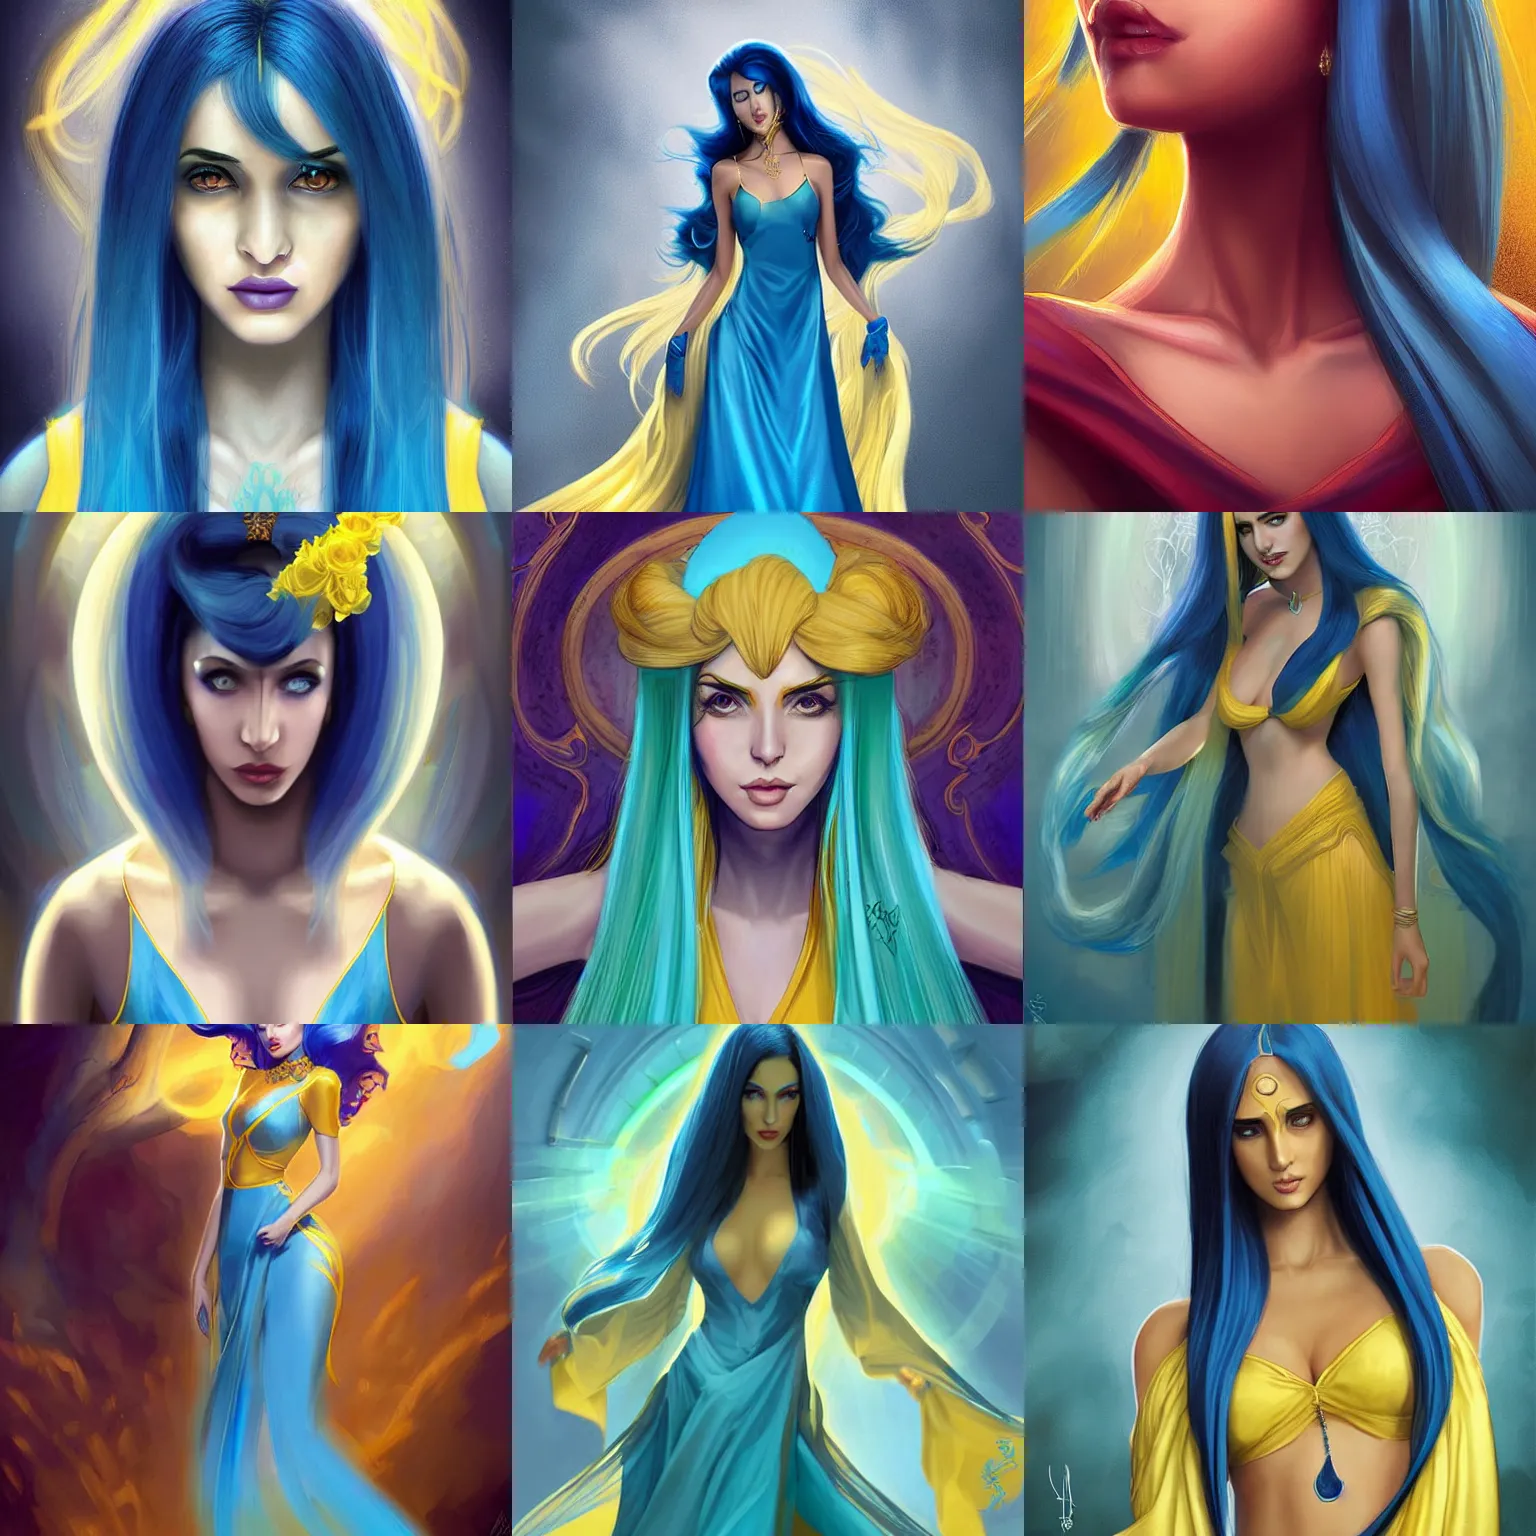 Prompt: Sona is a slender, pale-skinned woman with long blue hair and yellow at the ends. Her robes is a long, elegant gown with a distinctive palette of blue, dark blue, turquoise and gold. portrait digital art by Dave Greco Artgerm, Ross Tran